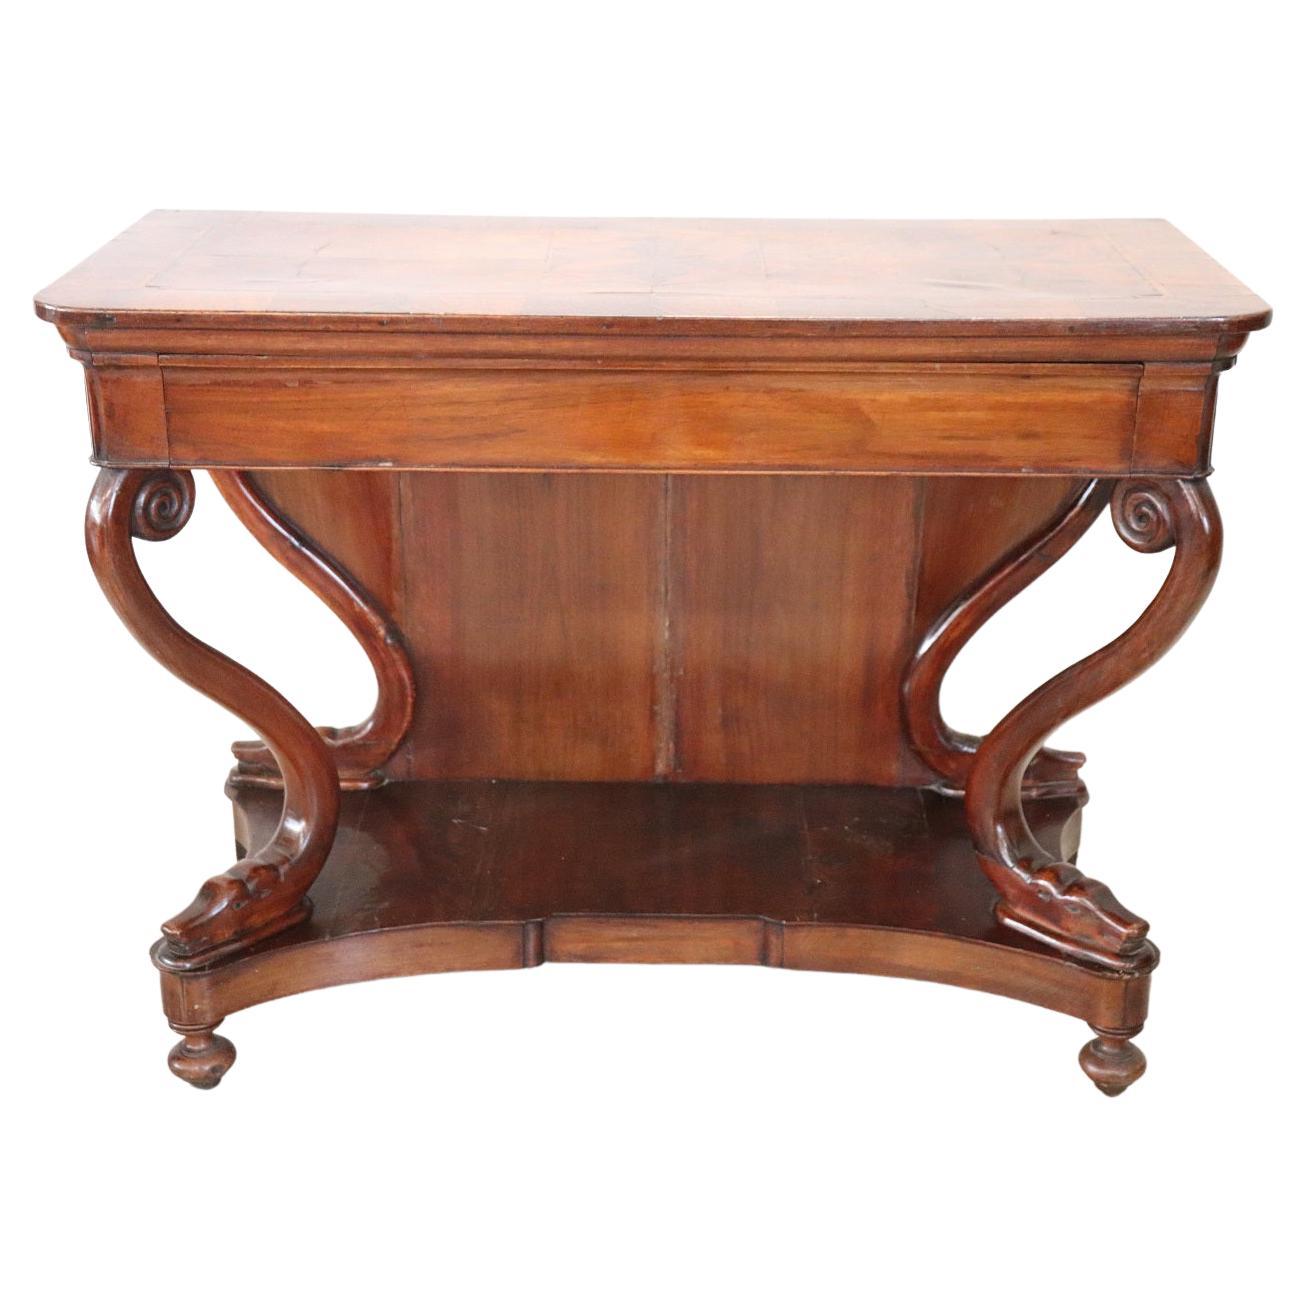 19th Century Italian Carved Walnut Charle X Antique Console Table